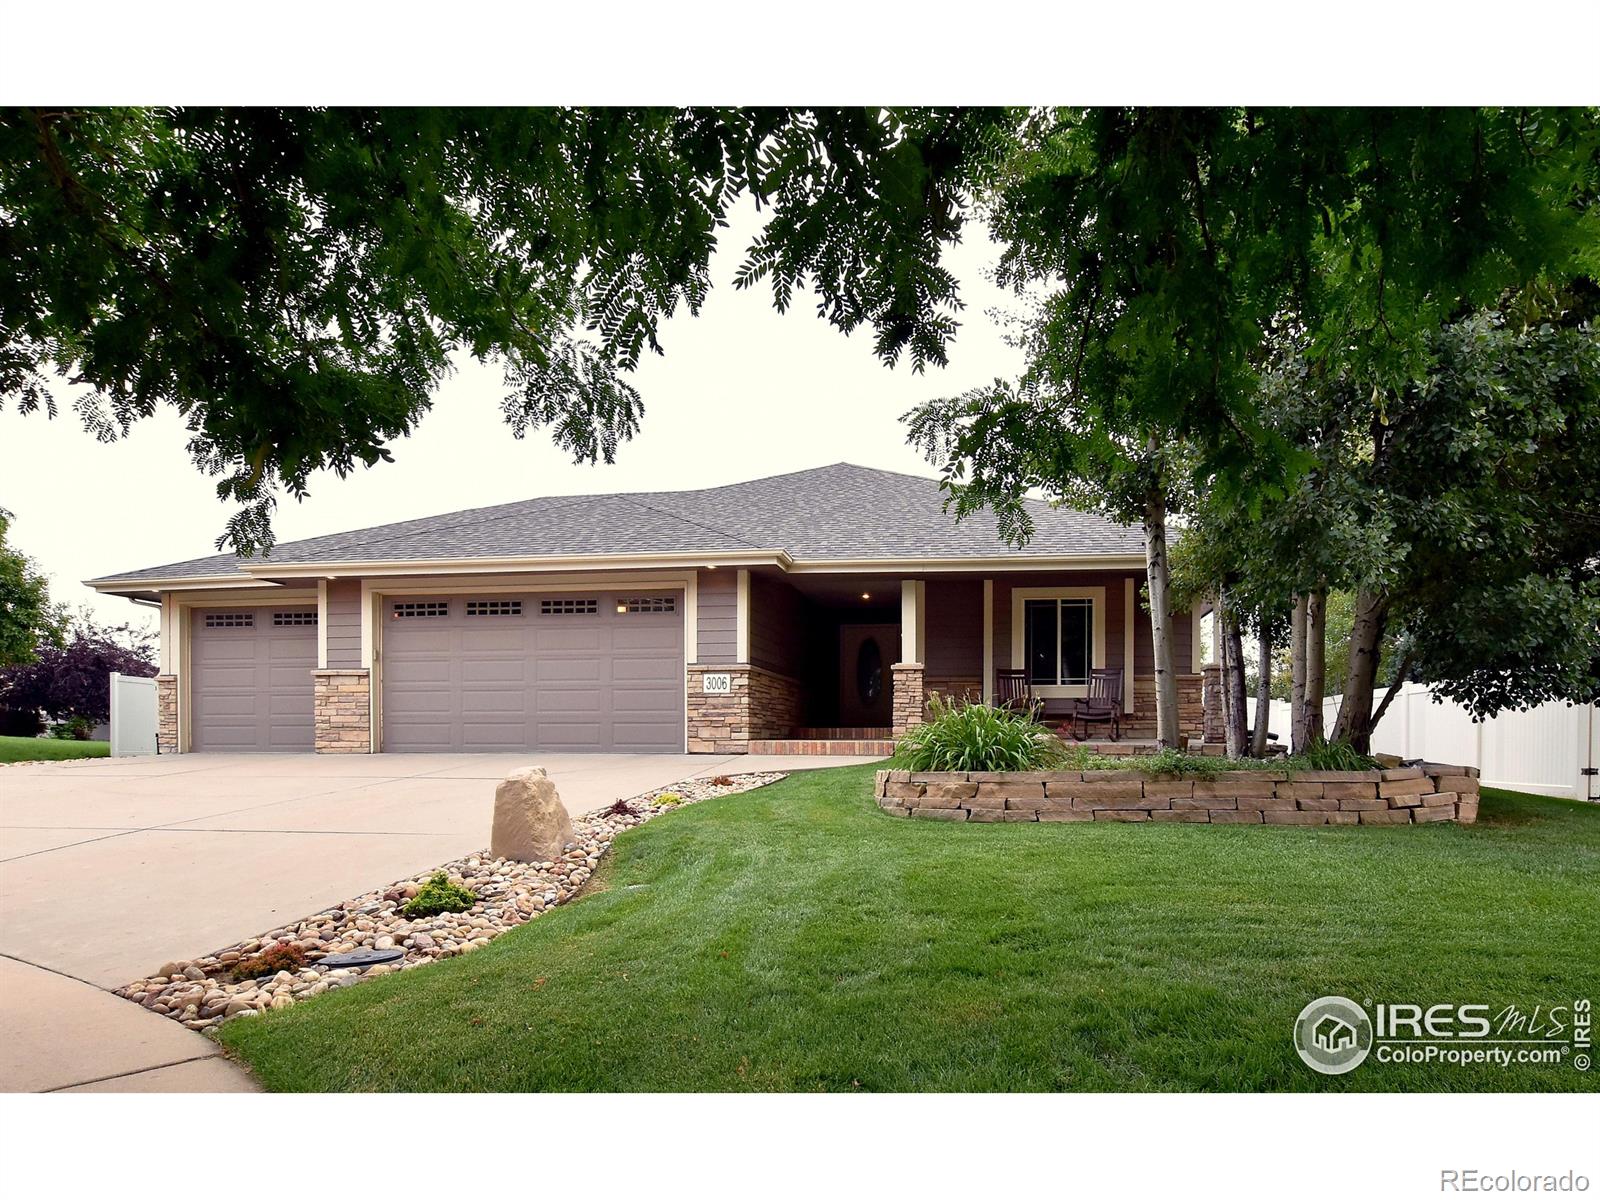 3006  69th Ave Pl, greeley MLS: 123456789994344 Beds: 4 Baths: 3 Price: $725,000